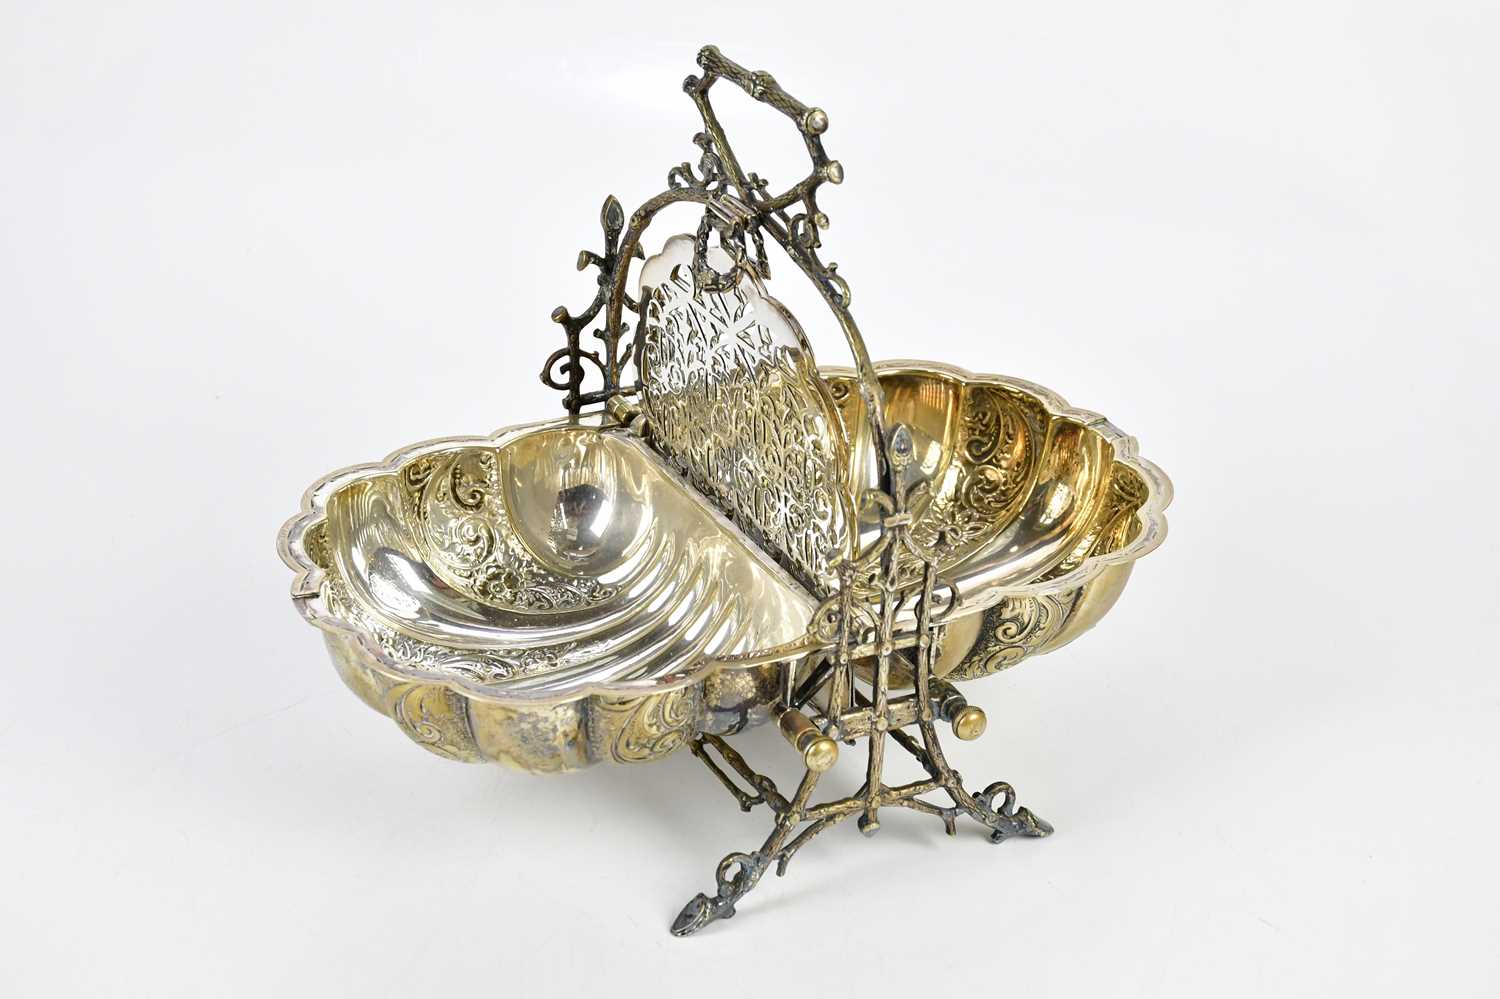 FENTON BROTHERS OF SHEFFIELD; a silver plated muffin warmer of shell form, height 25cm. - Image 4 of 5